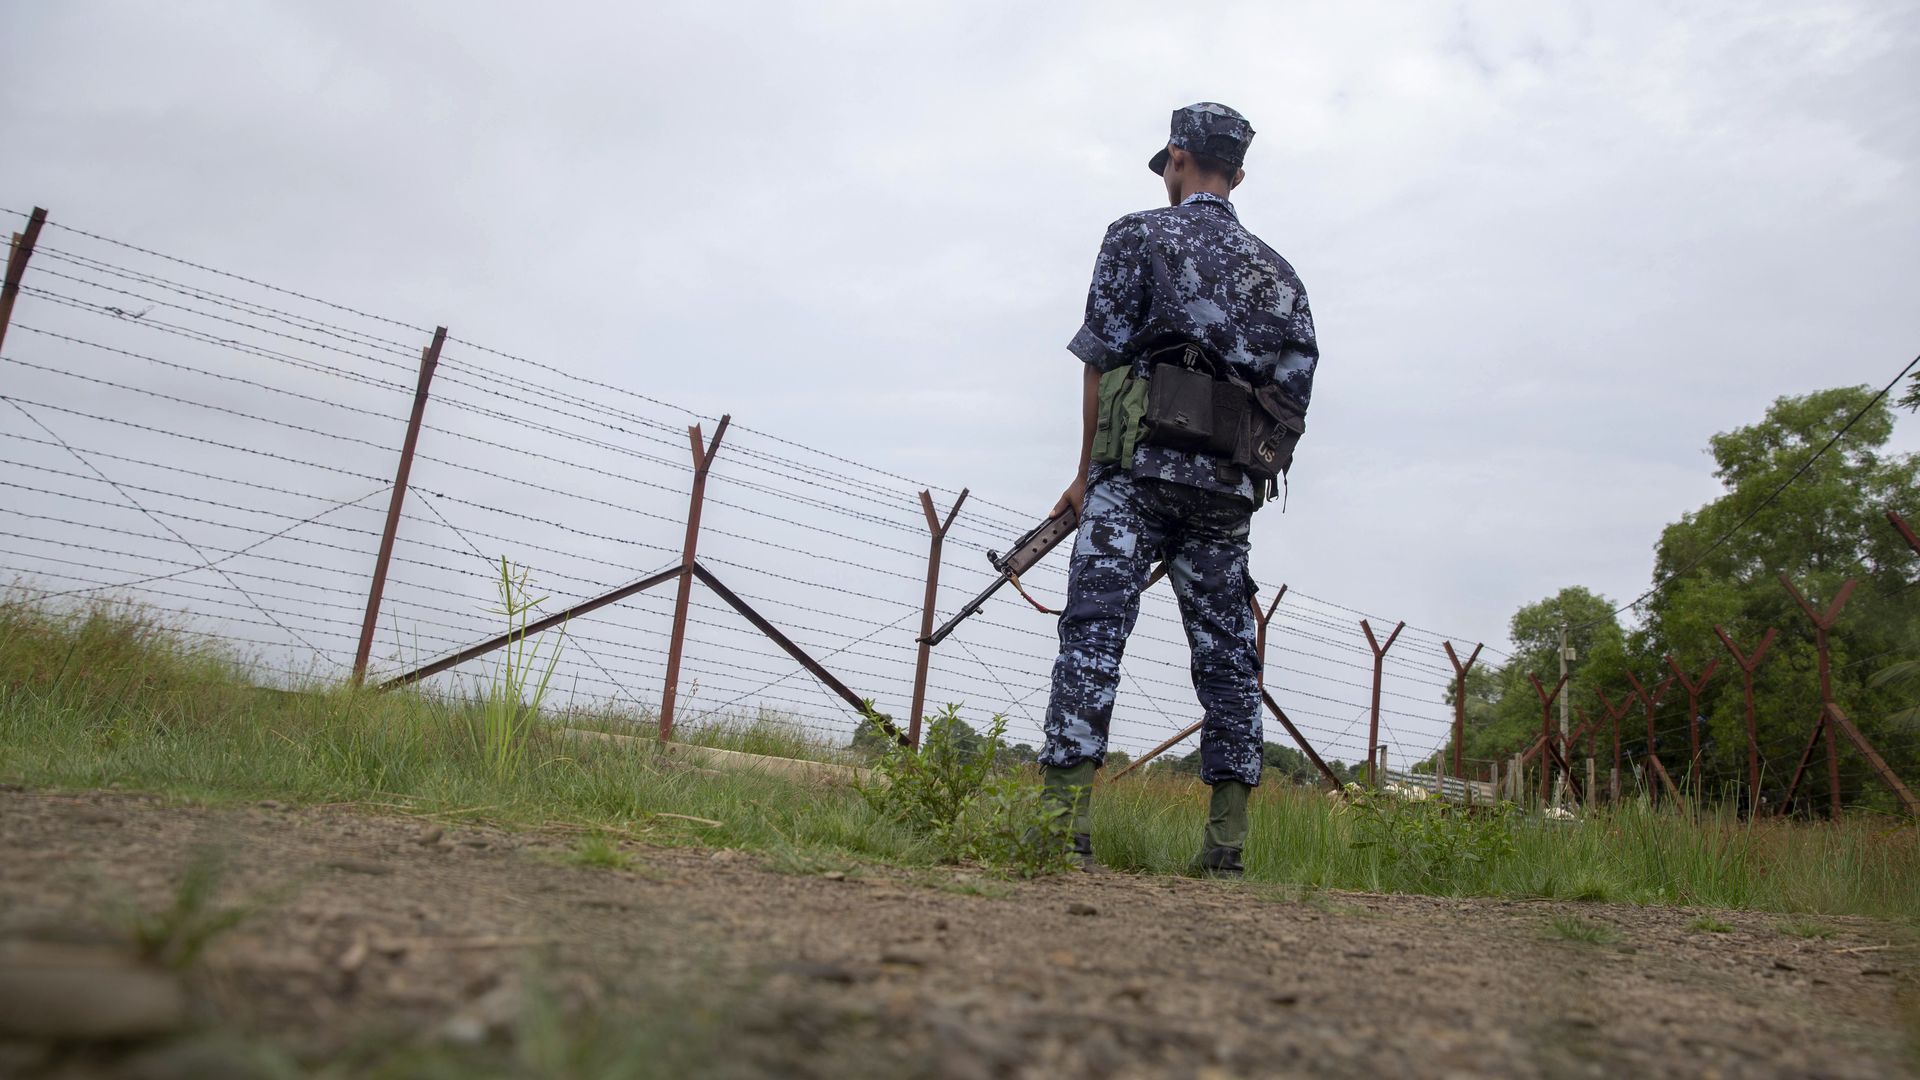 A Myanmar guard stands by a fence.